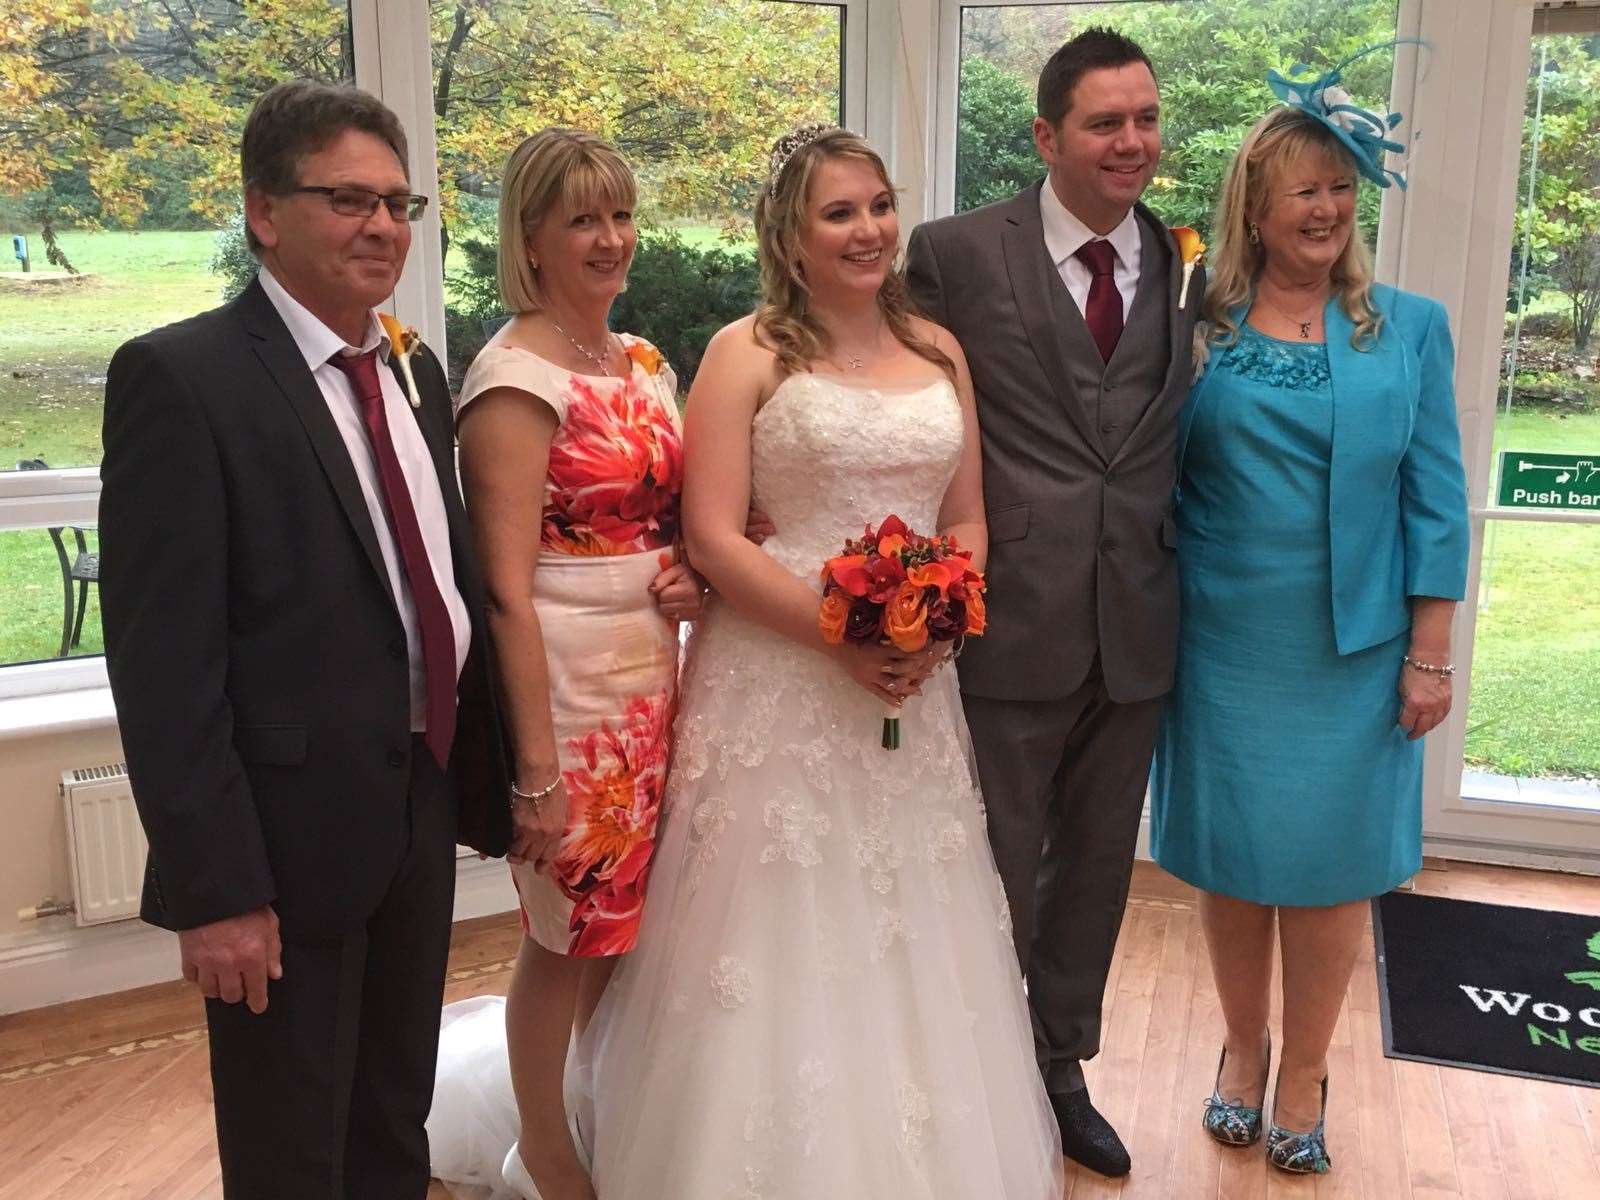 Sarah and Jeff Brown with their parents on their wedding day in 2016